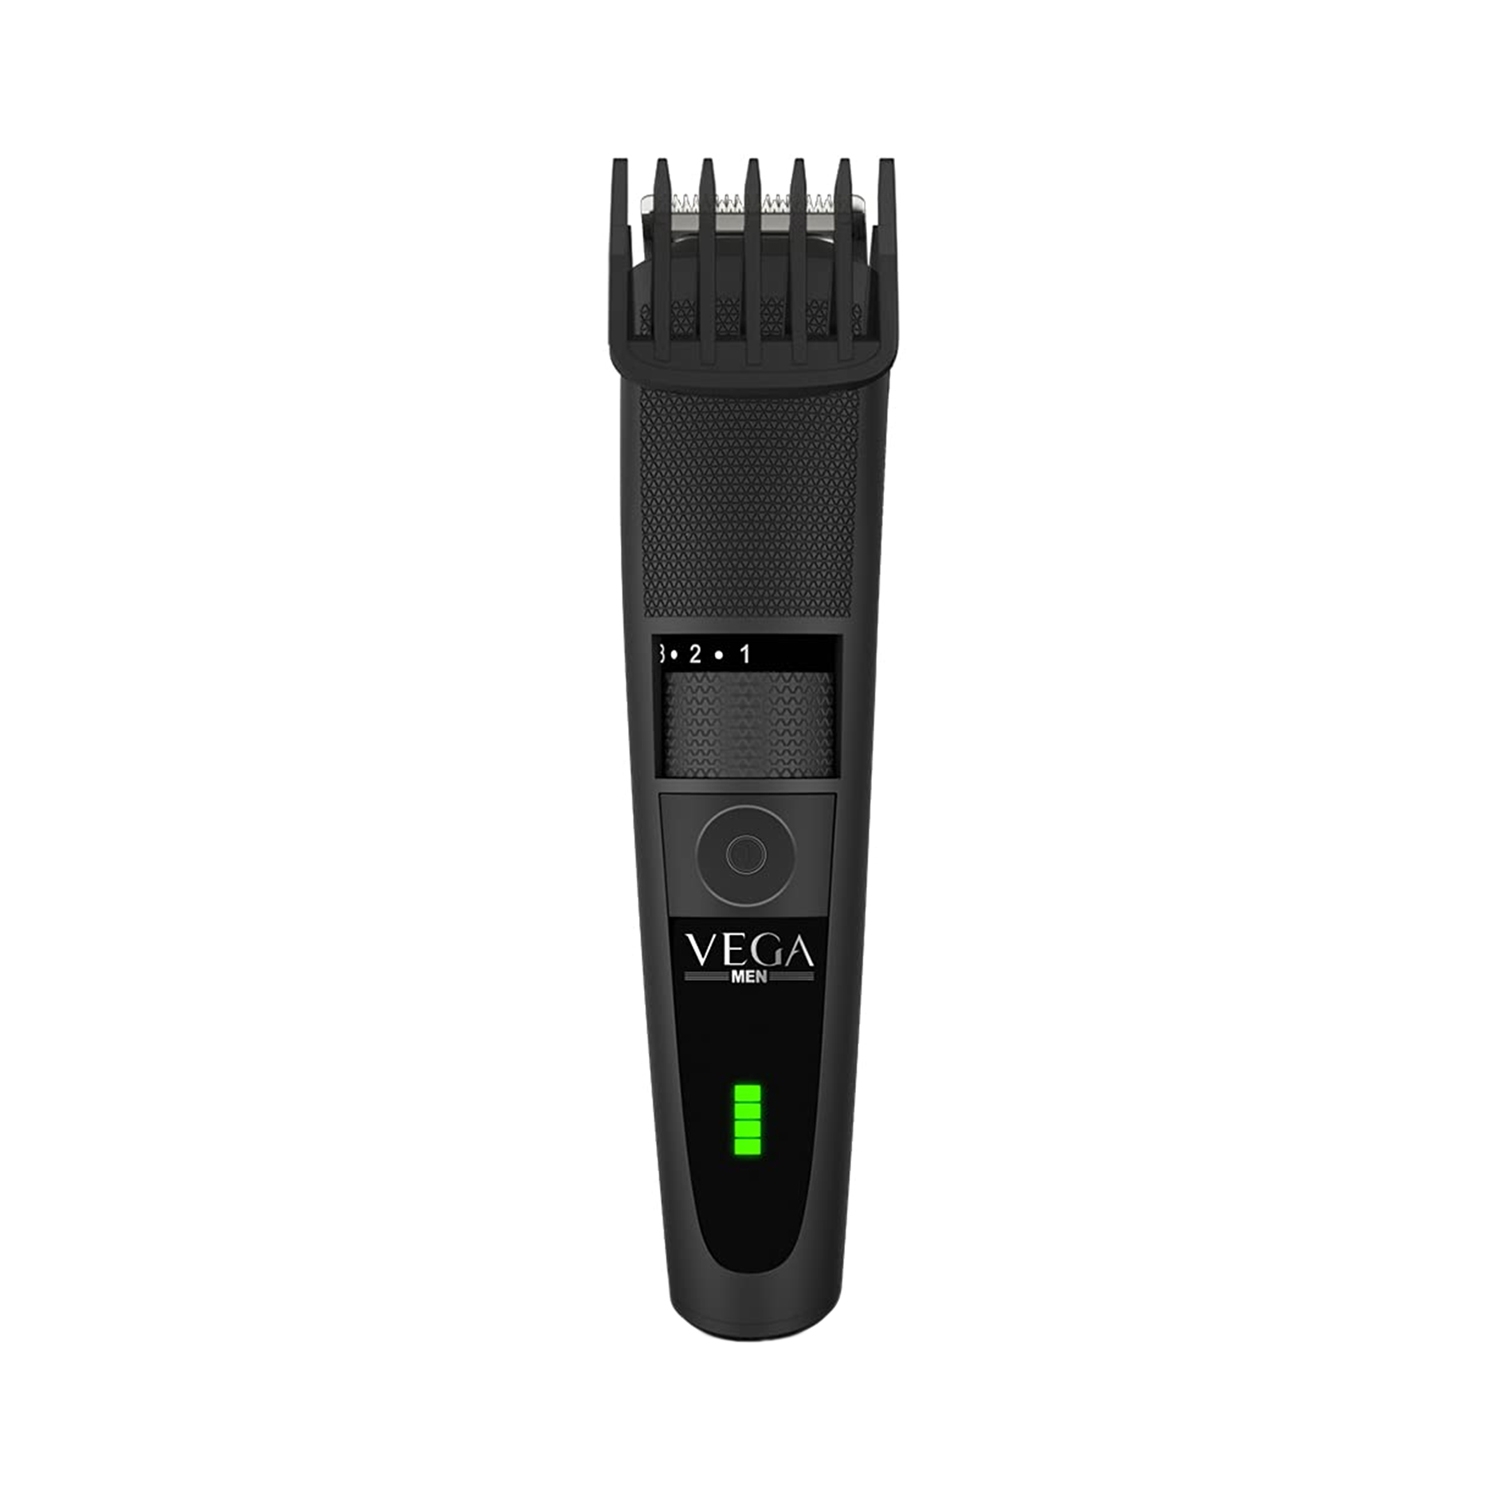 Vega | Vega Men T3 Beard Trimmer For Men With Quick Charge, 90 Mins Run-time, For Cord & Cordless Use And 20 Length Settings, (VHTH-19)